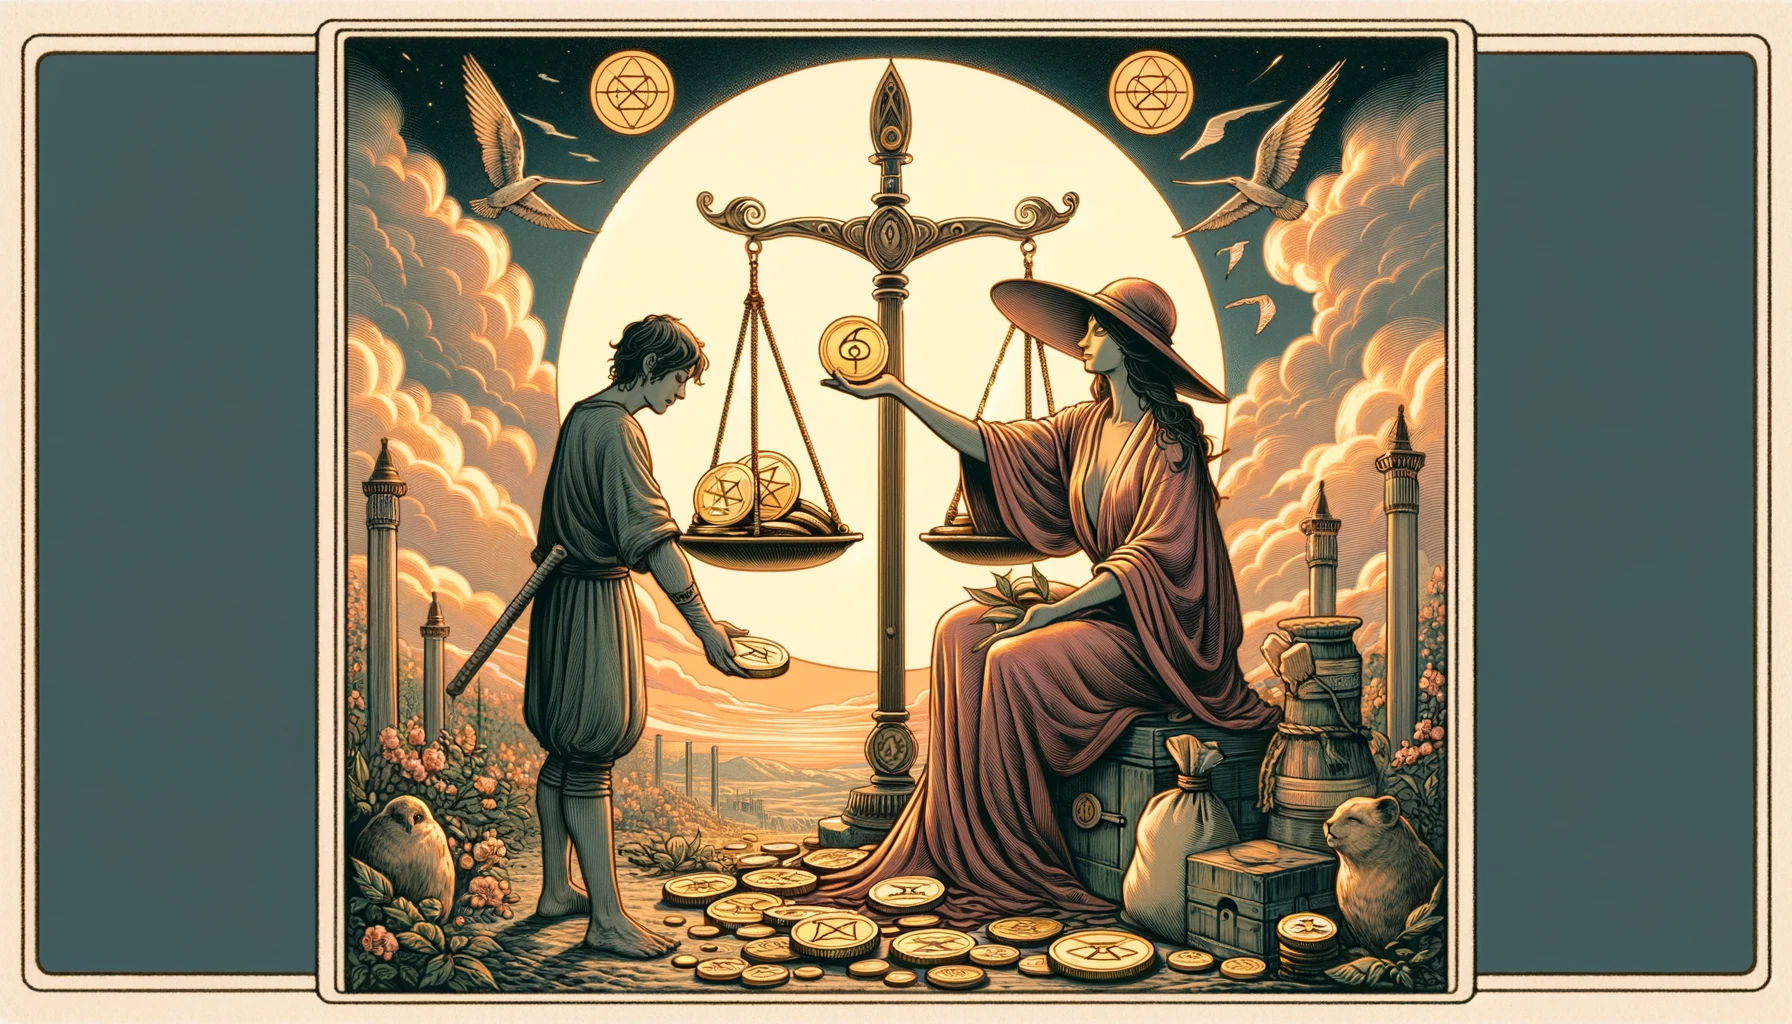 The image depicts a figure embodying the qualities of generosity and fairness, symbolizing the essence of the Six of Pentacles as a person. The individual is shown engaged in acts of philanthropy and responsible resource distribution. The environment surrounding them may include visual cues representing balance and charity. This visualization emphasizes themes of ethical stewardship, the balance of giving and receiving, and the importance of generosity in contributing to the well-being of others.